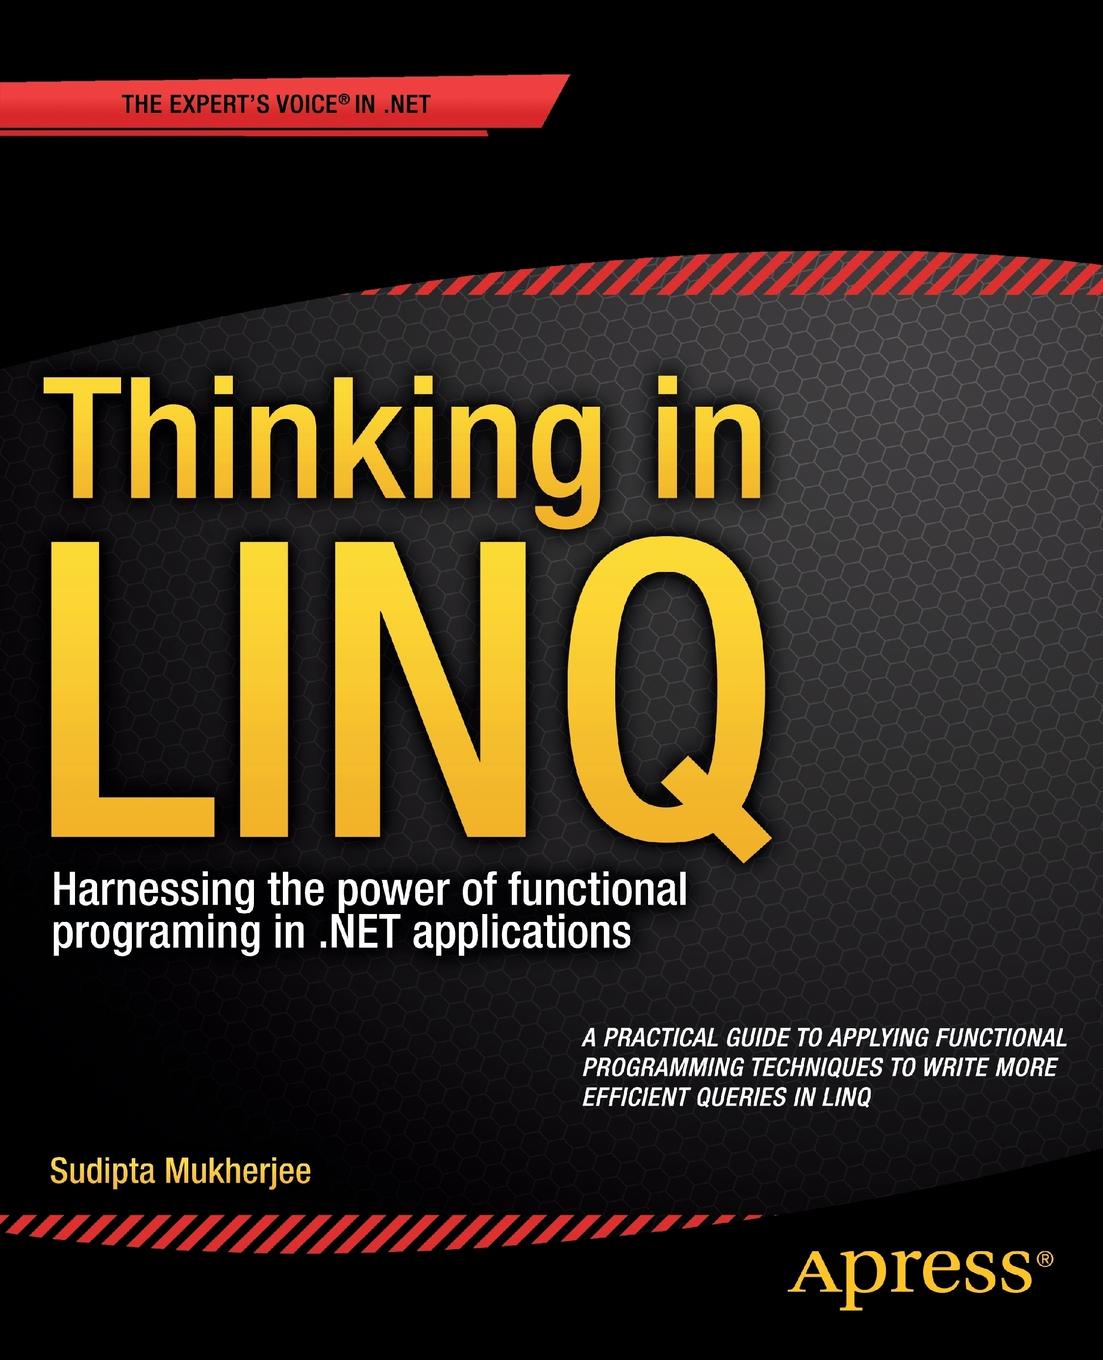 Thinking in LINQ. Harnessing the power of functional programing in .NET applications